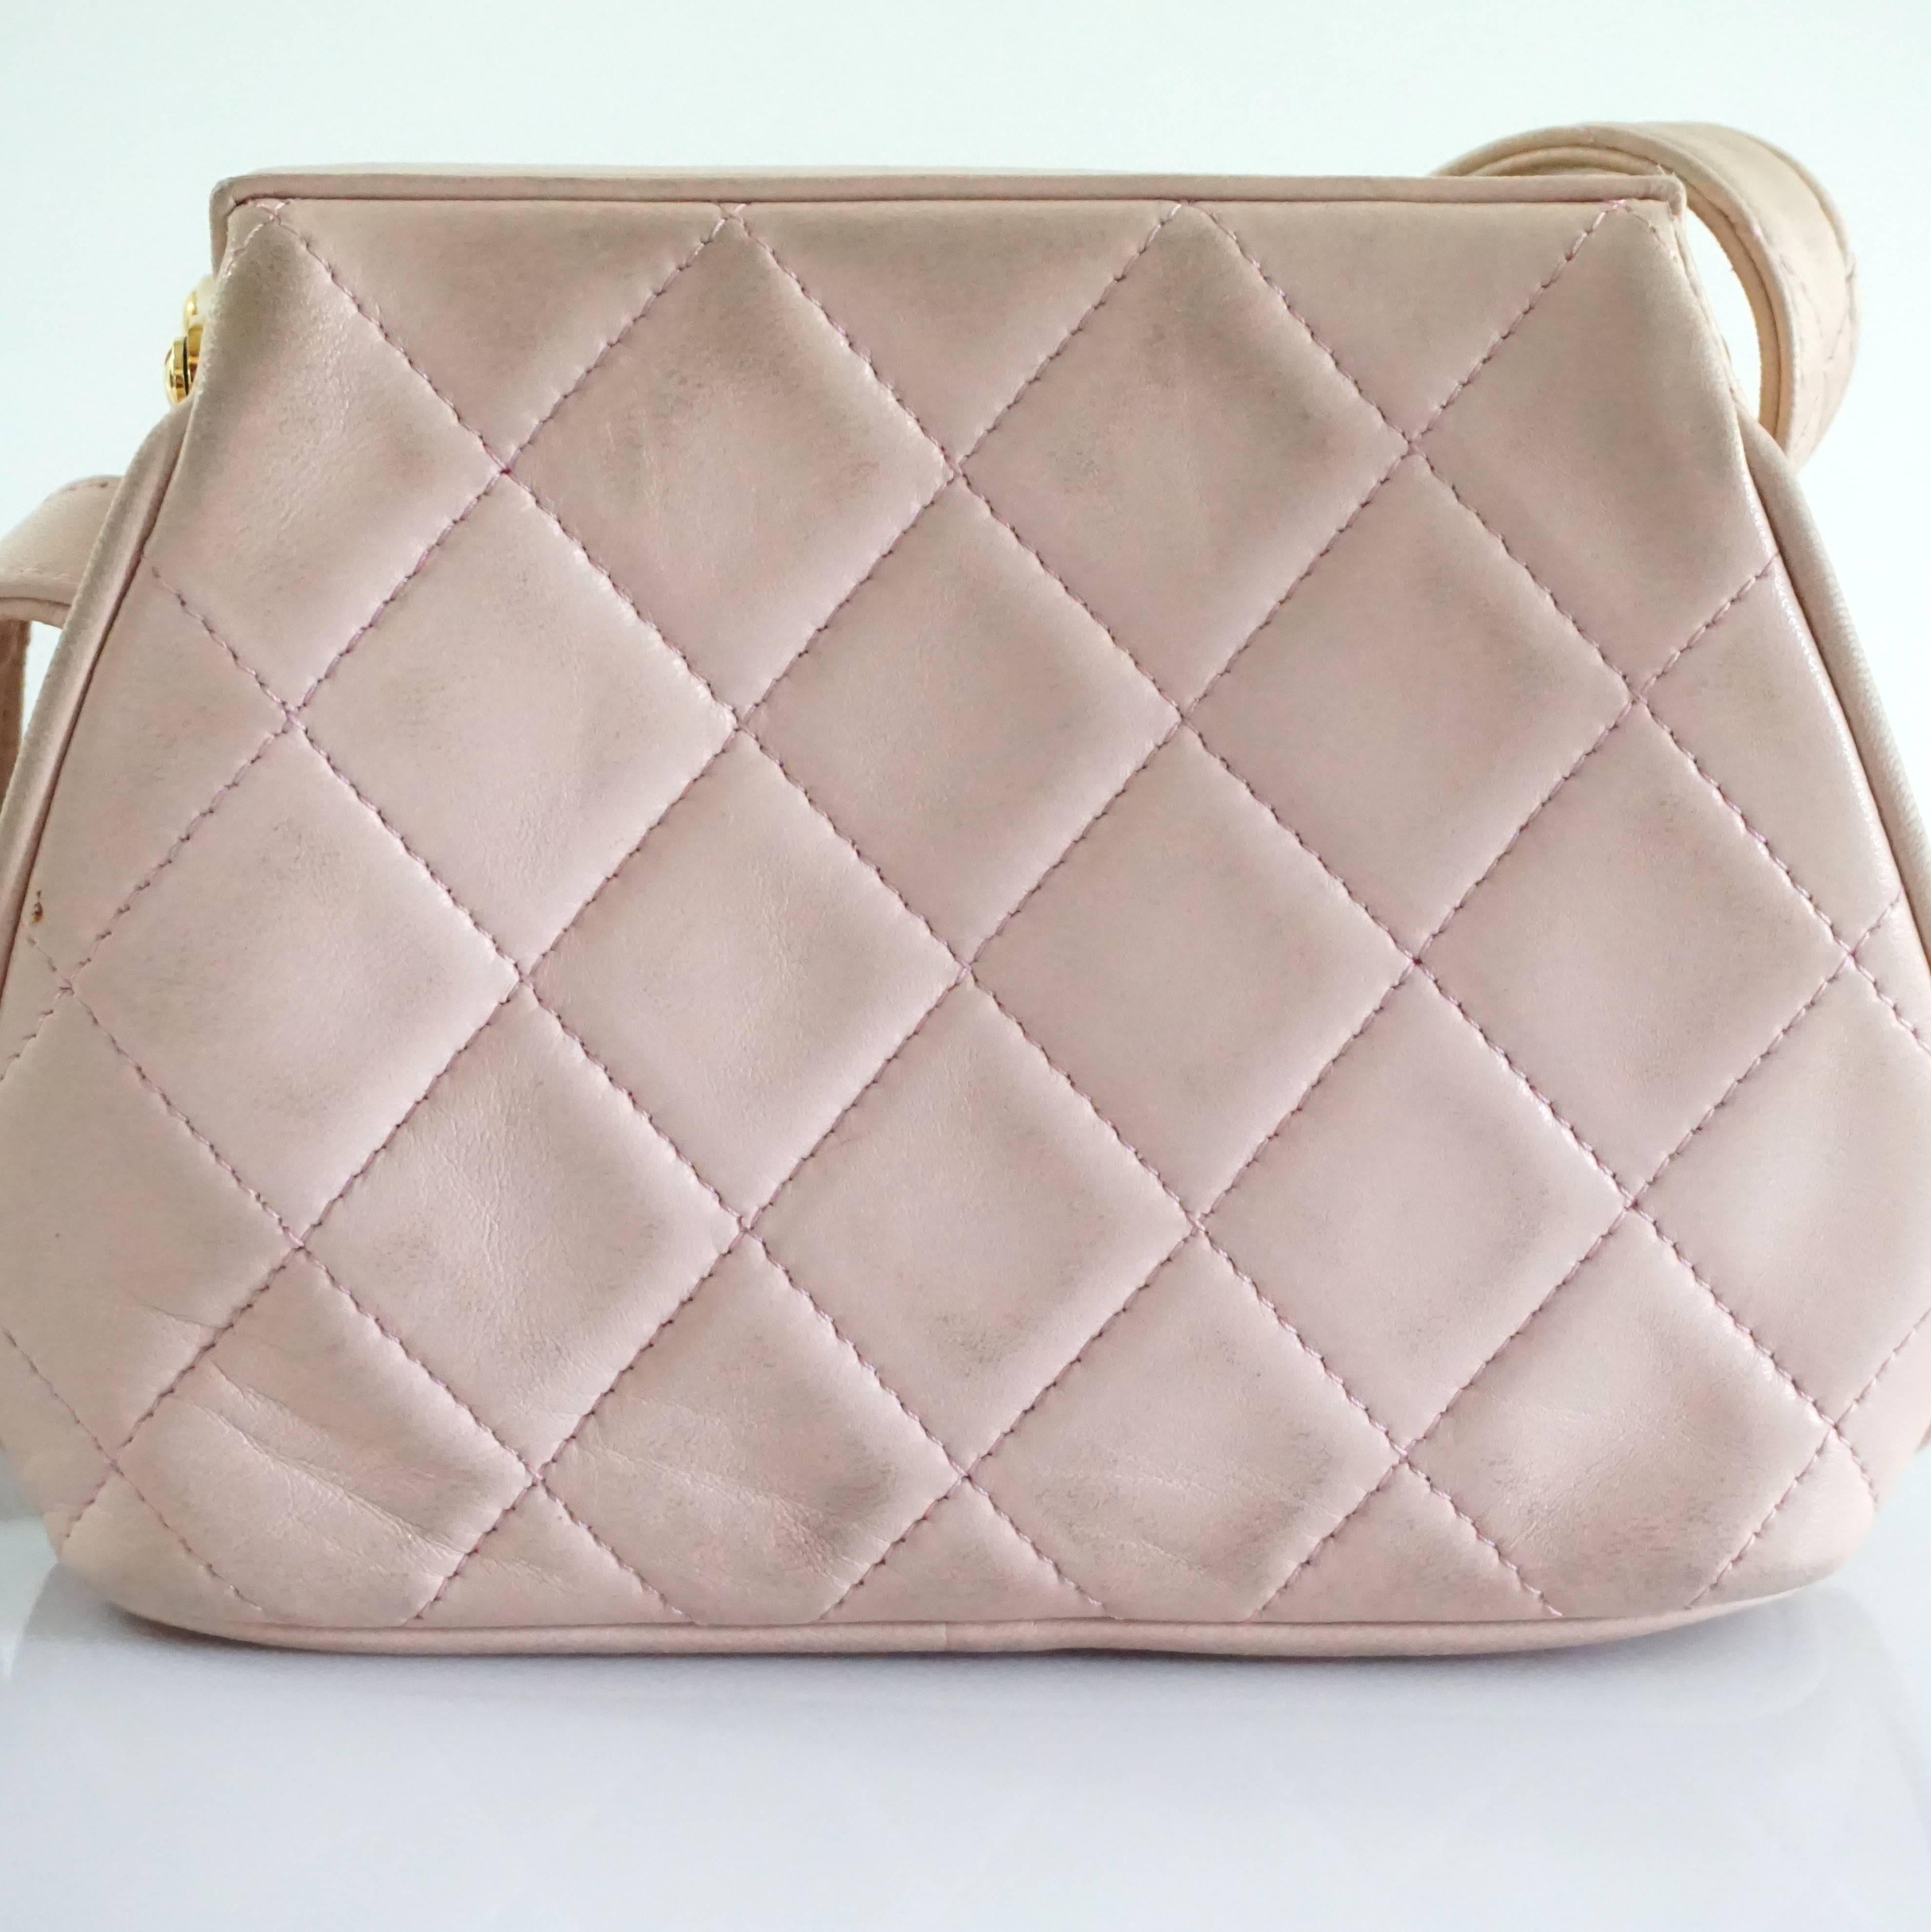 Chanel Pink Leather Frame Crossbody Bag - circa late 80's 2